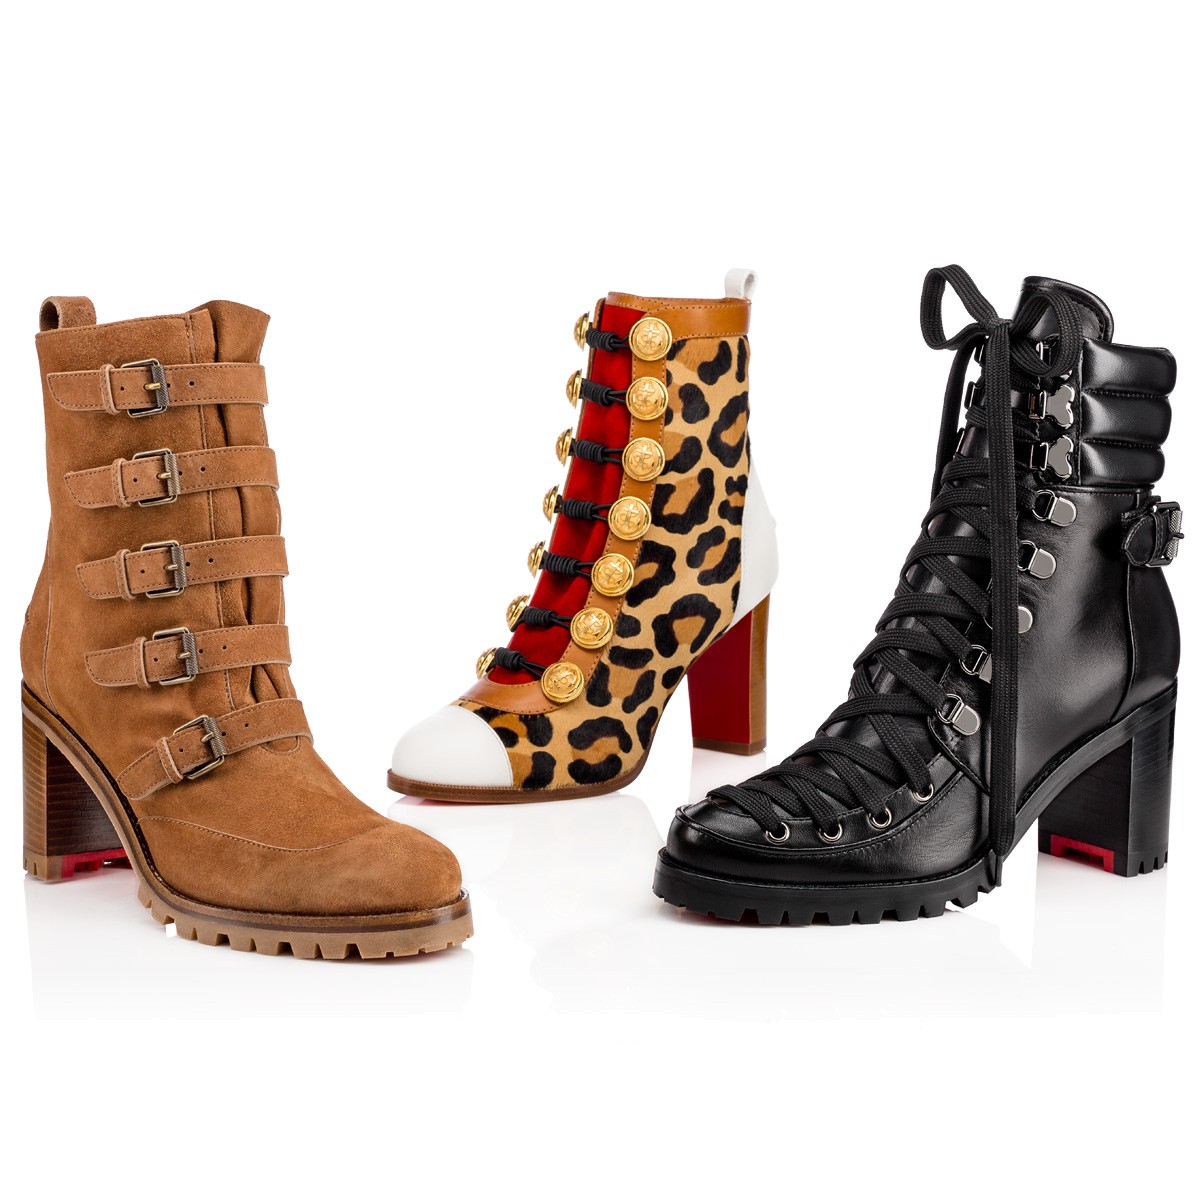 Insider: Shoeing “Burlesque”…Lively at Louboutin – Footwear News